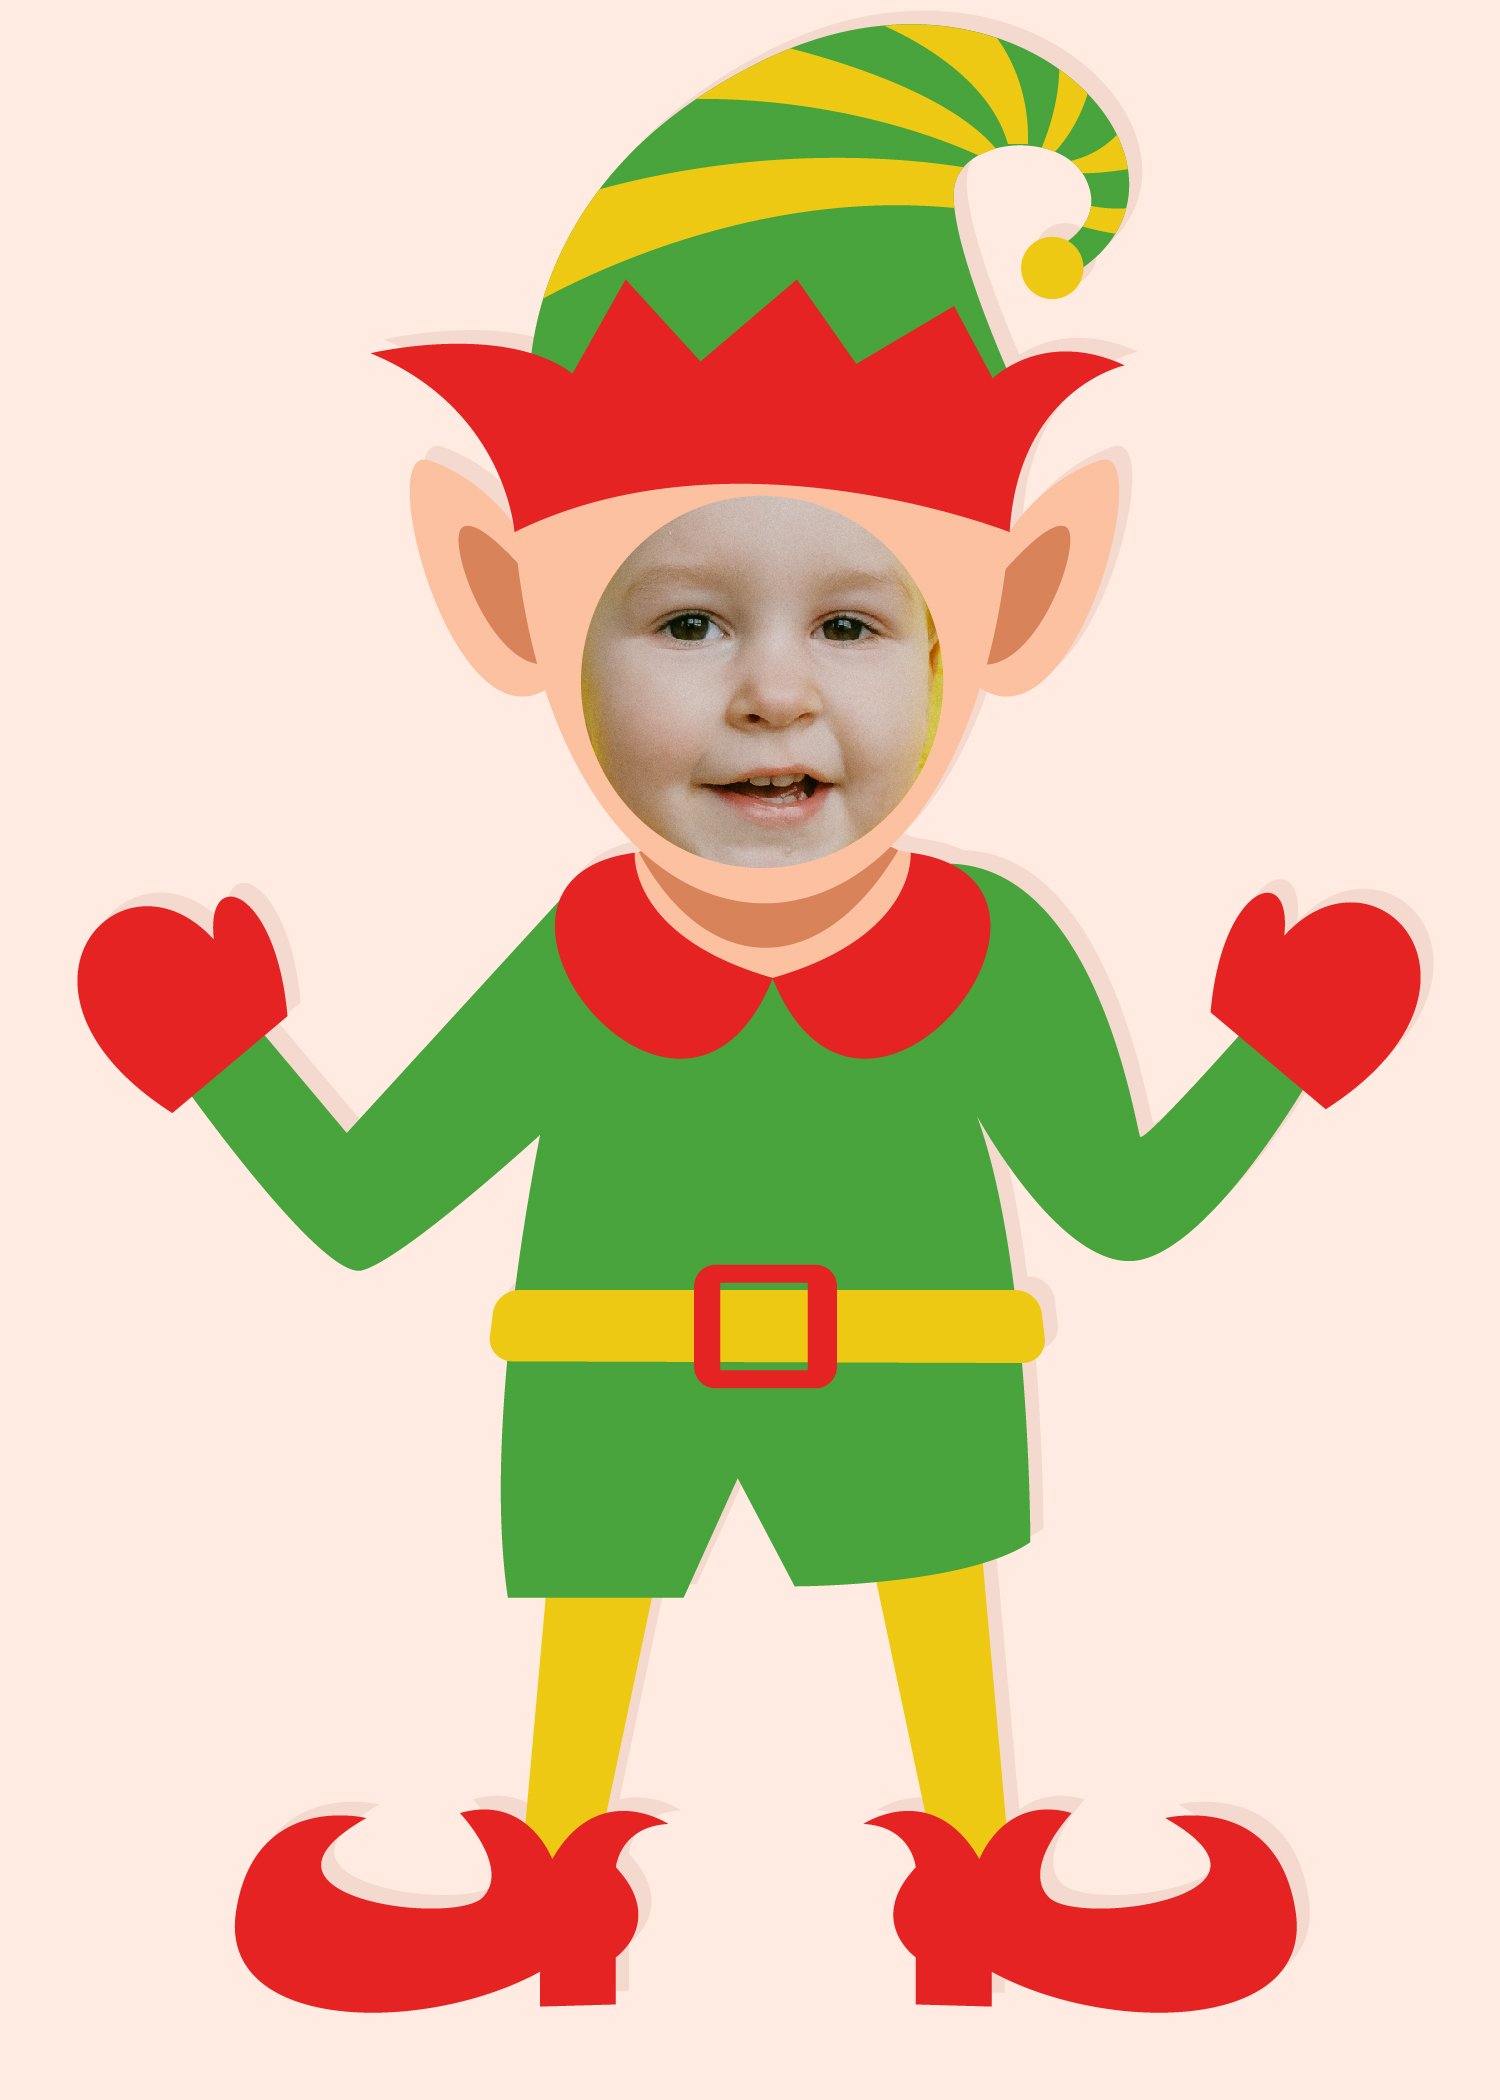 Free Christmas Elf Template For Photo Download in PSD, SVG, JPG, PNG